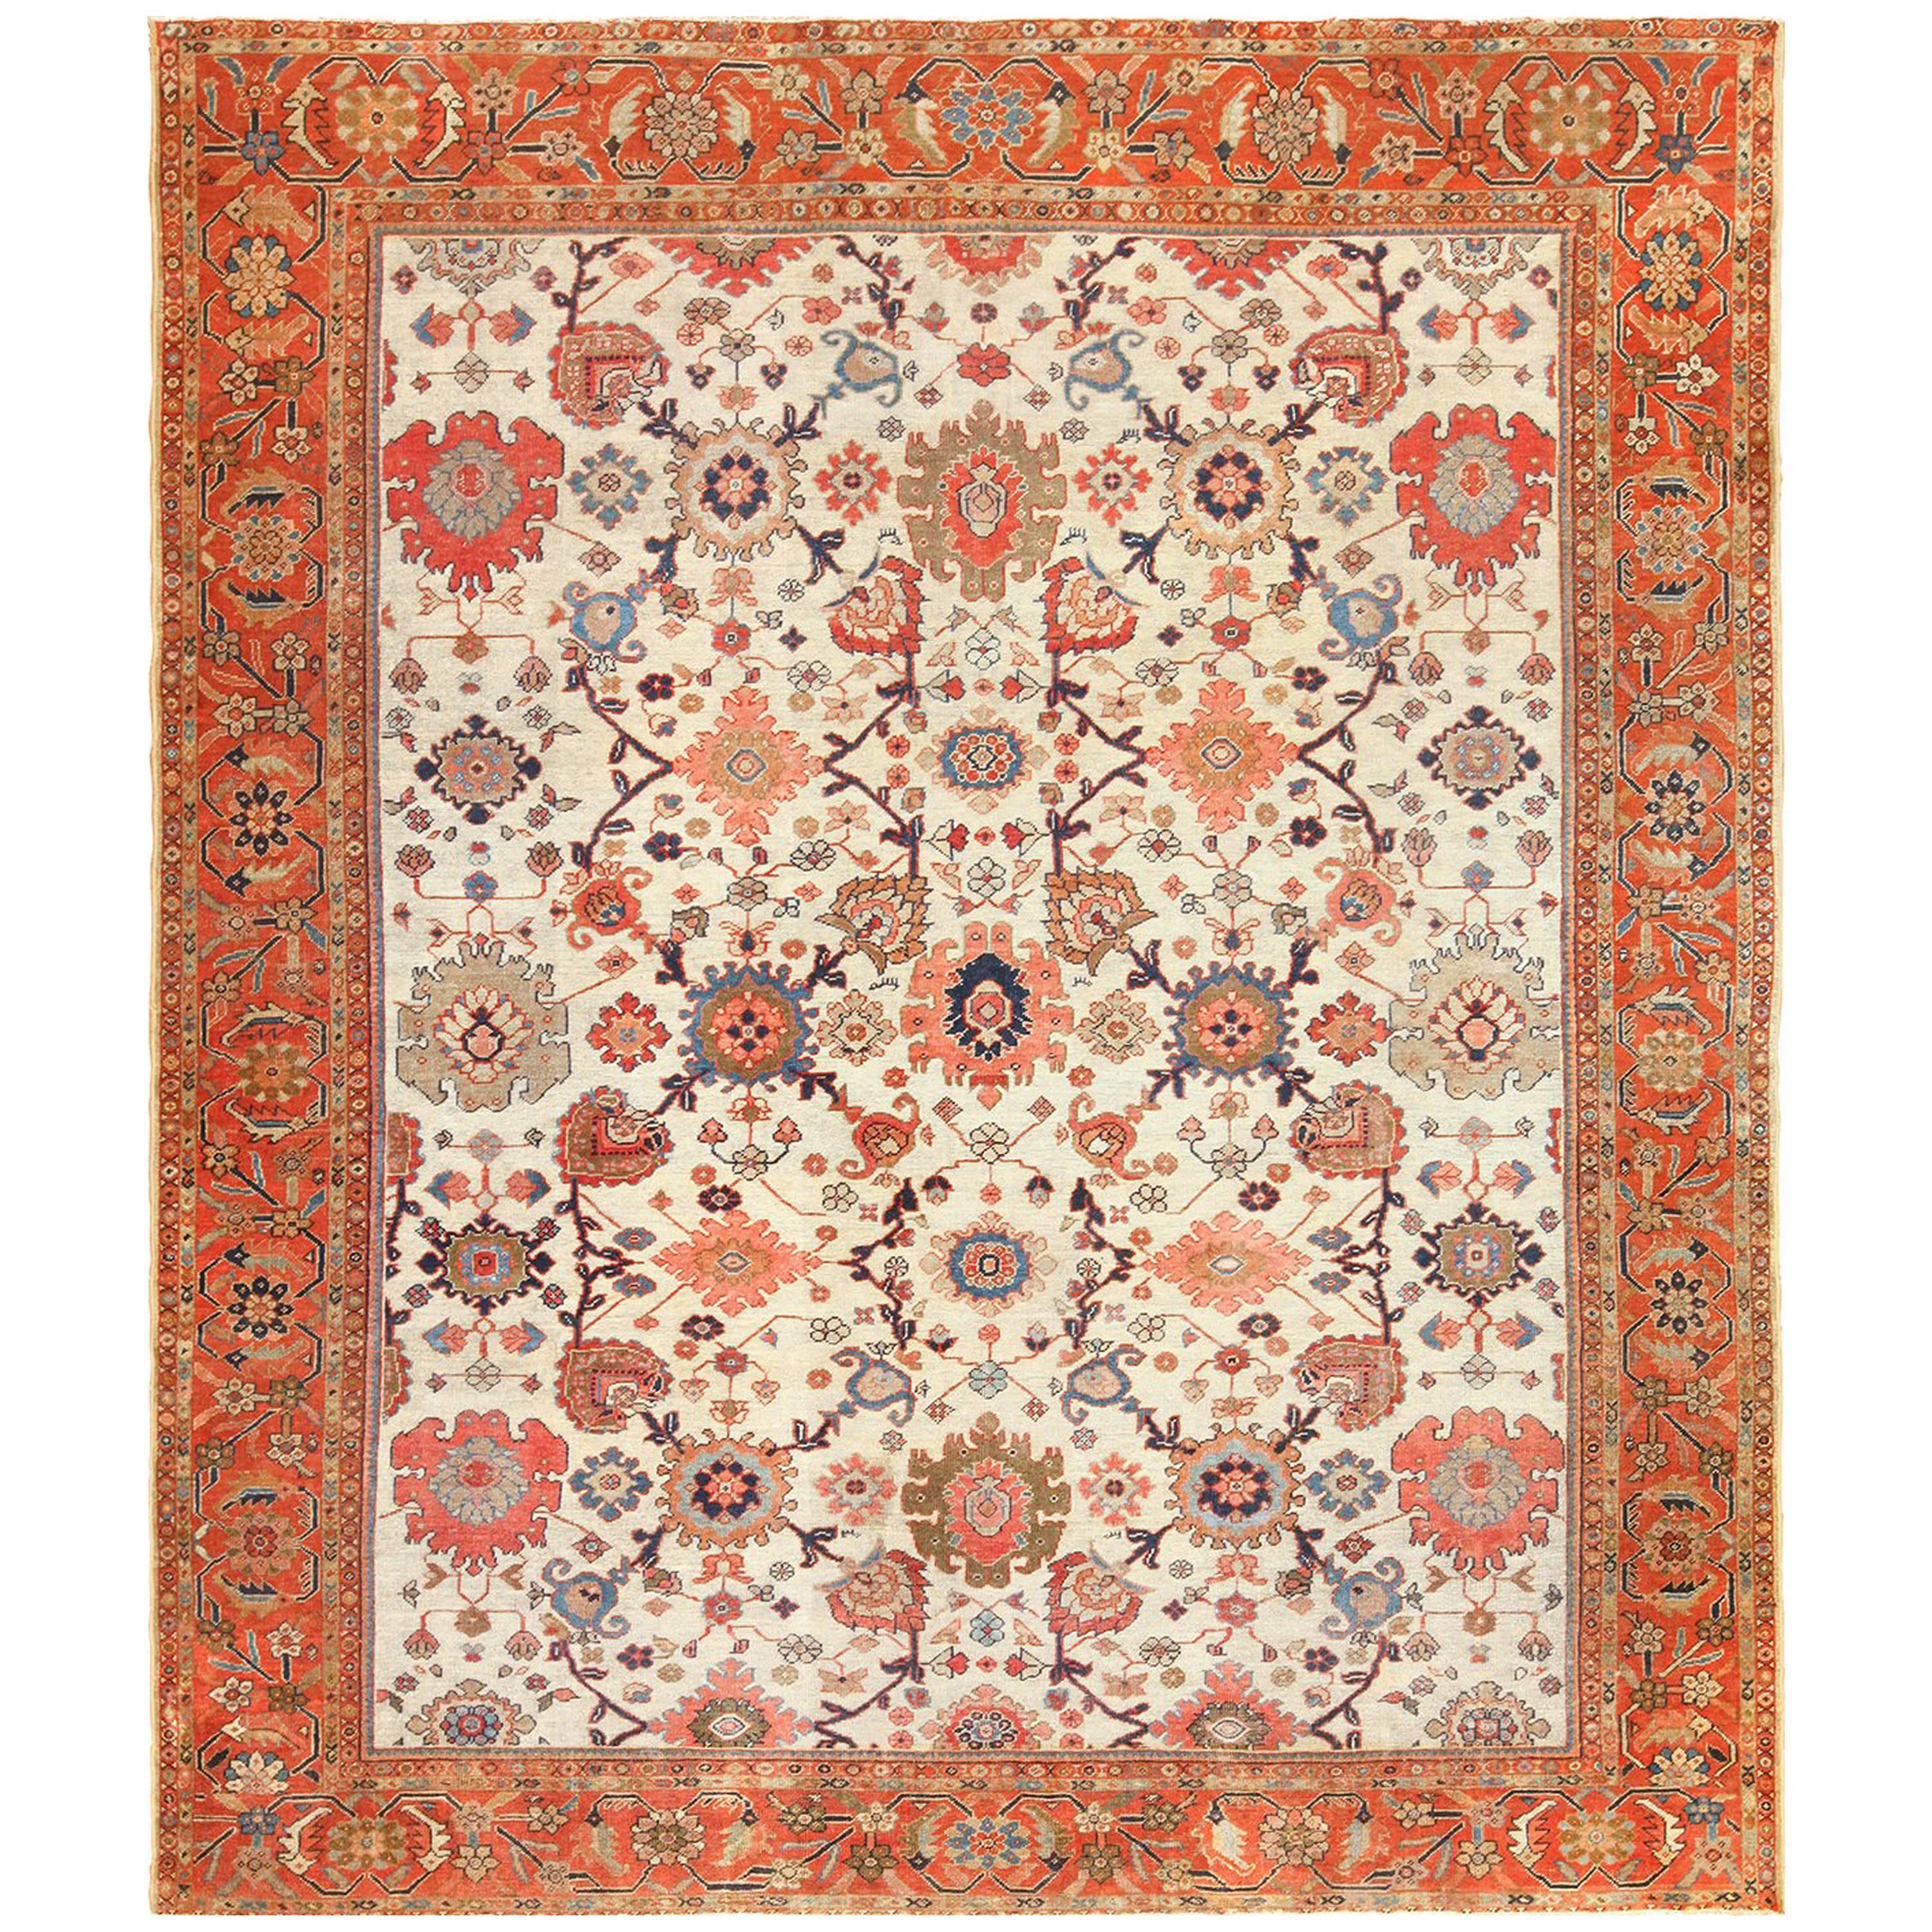 Ivory Background Antique Sultanabad Persian Rug